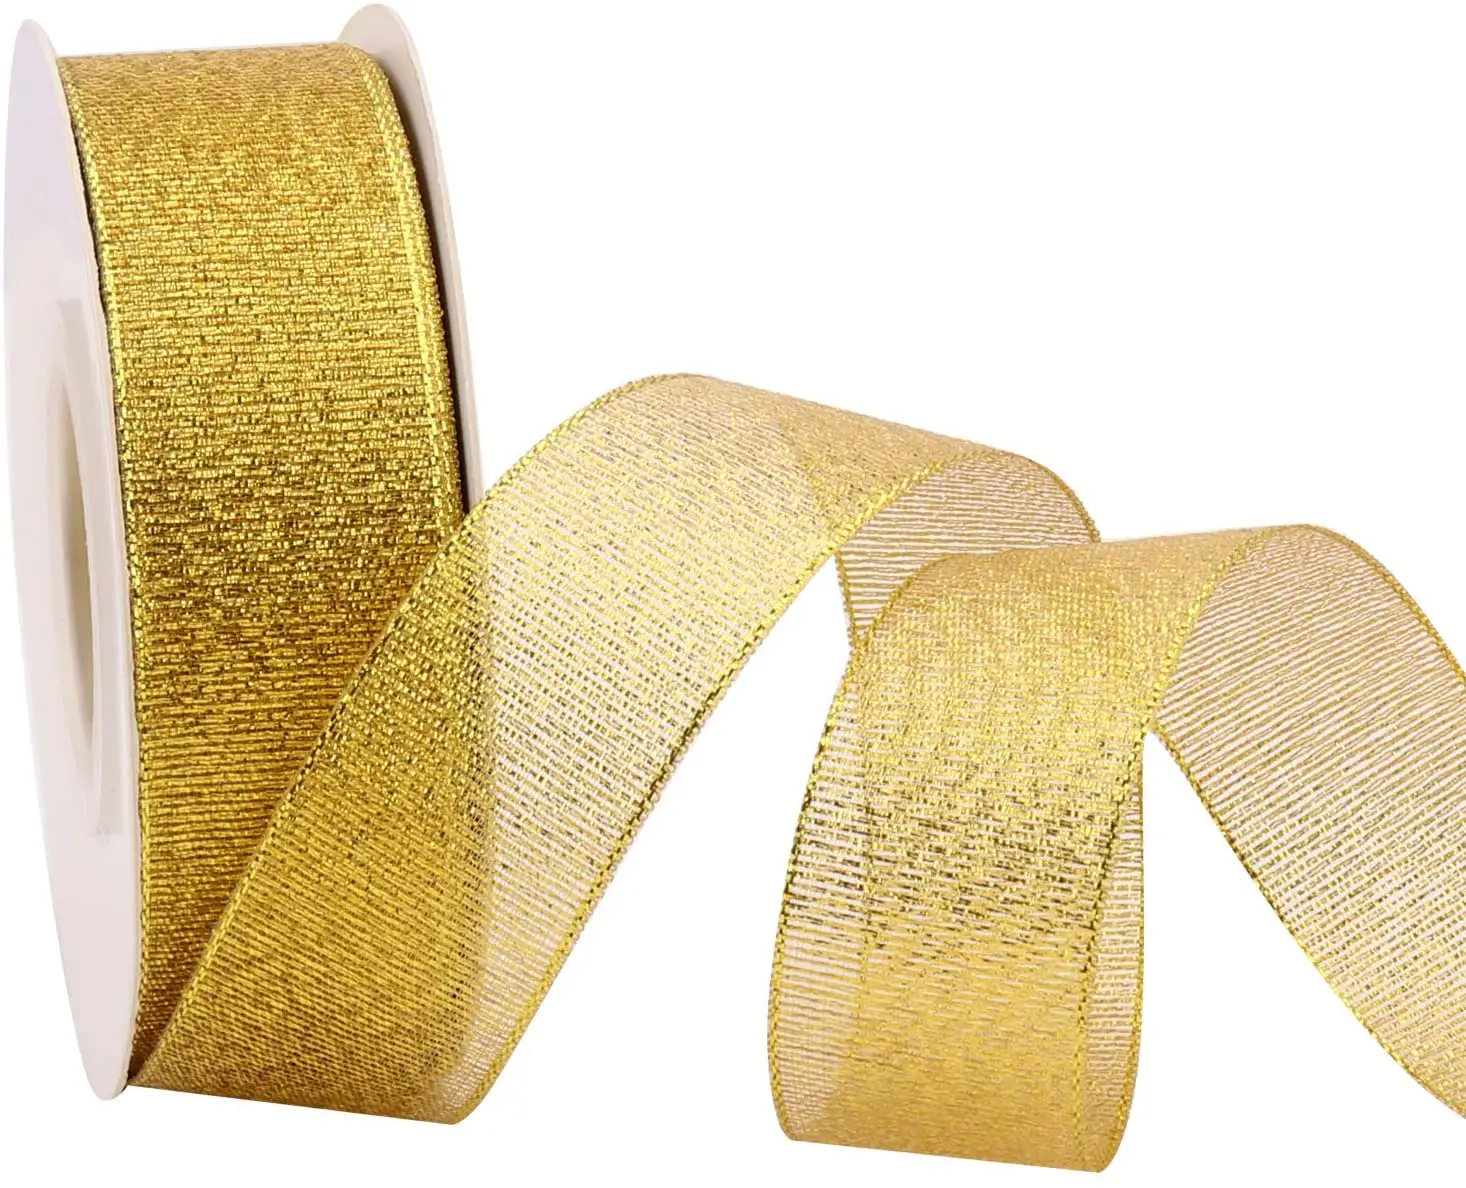 sheer 1 Inch Glitter Christmas Gold Ribbon Wired organza mesh snowflake Gold Ribbon for Gift Wrapping for Wedding Xmas